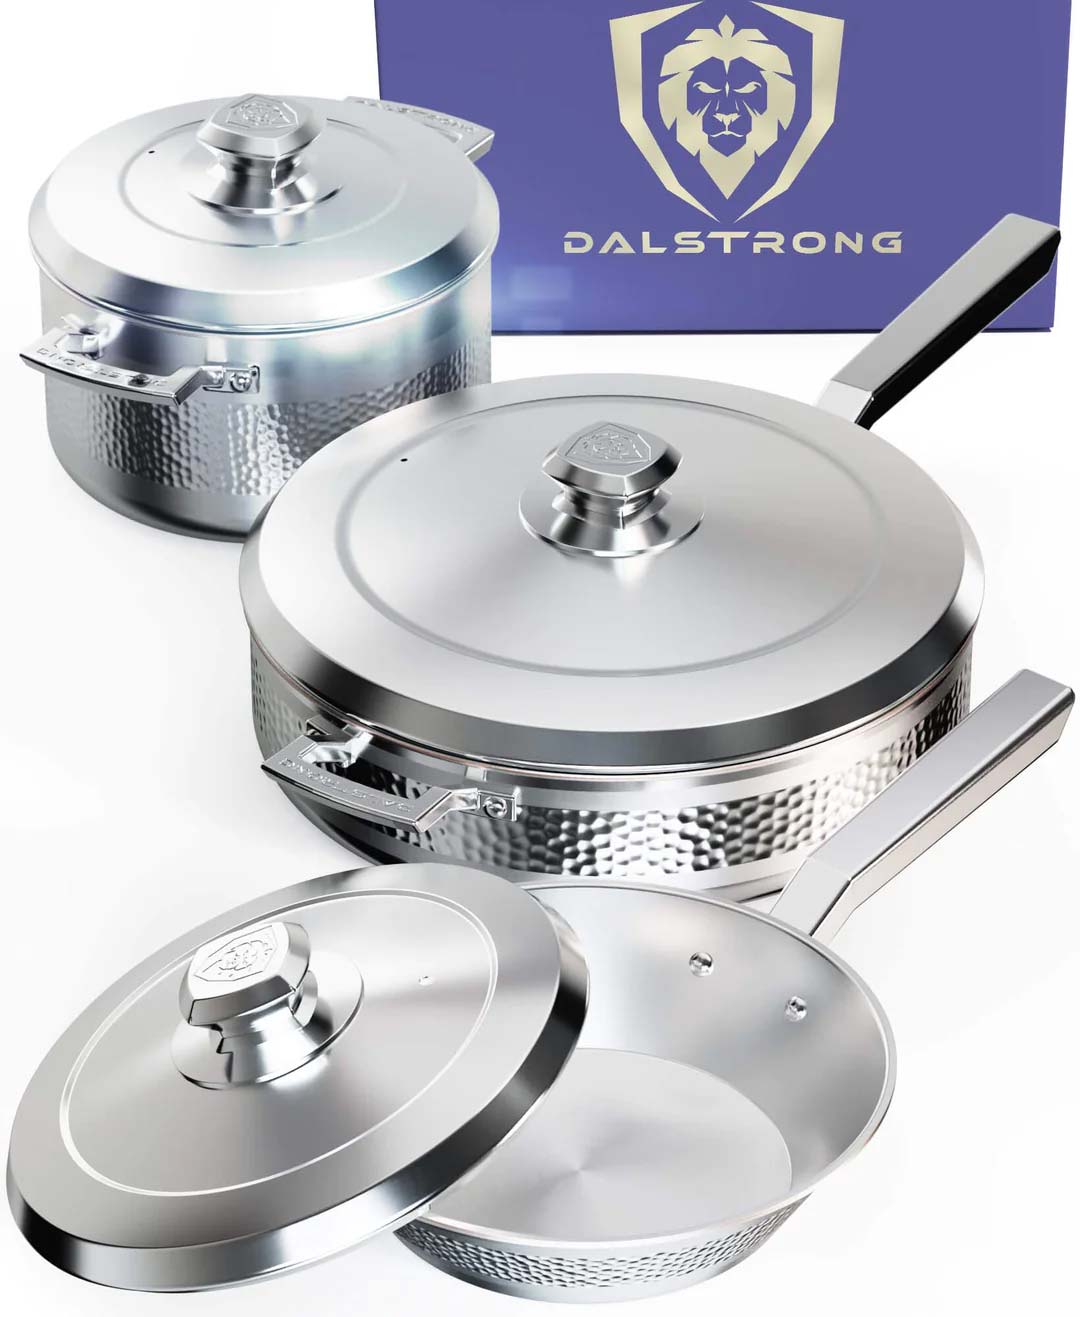 Dalstrong avalon series 6 piece cookware set silver in front of it's premium packaging.